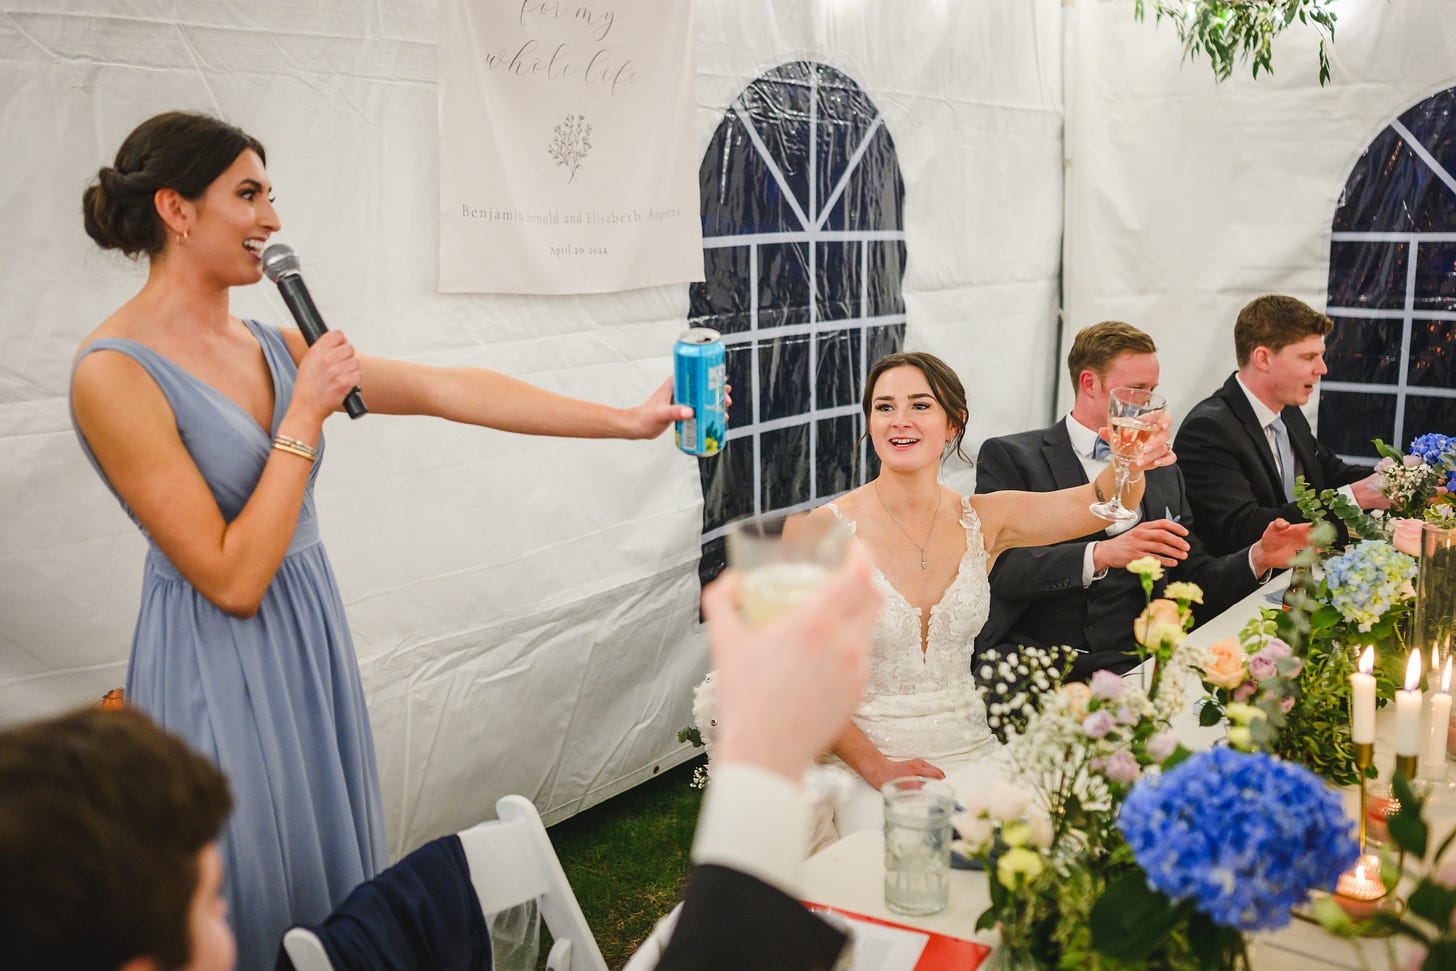 A maid of honor giving a toast